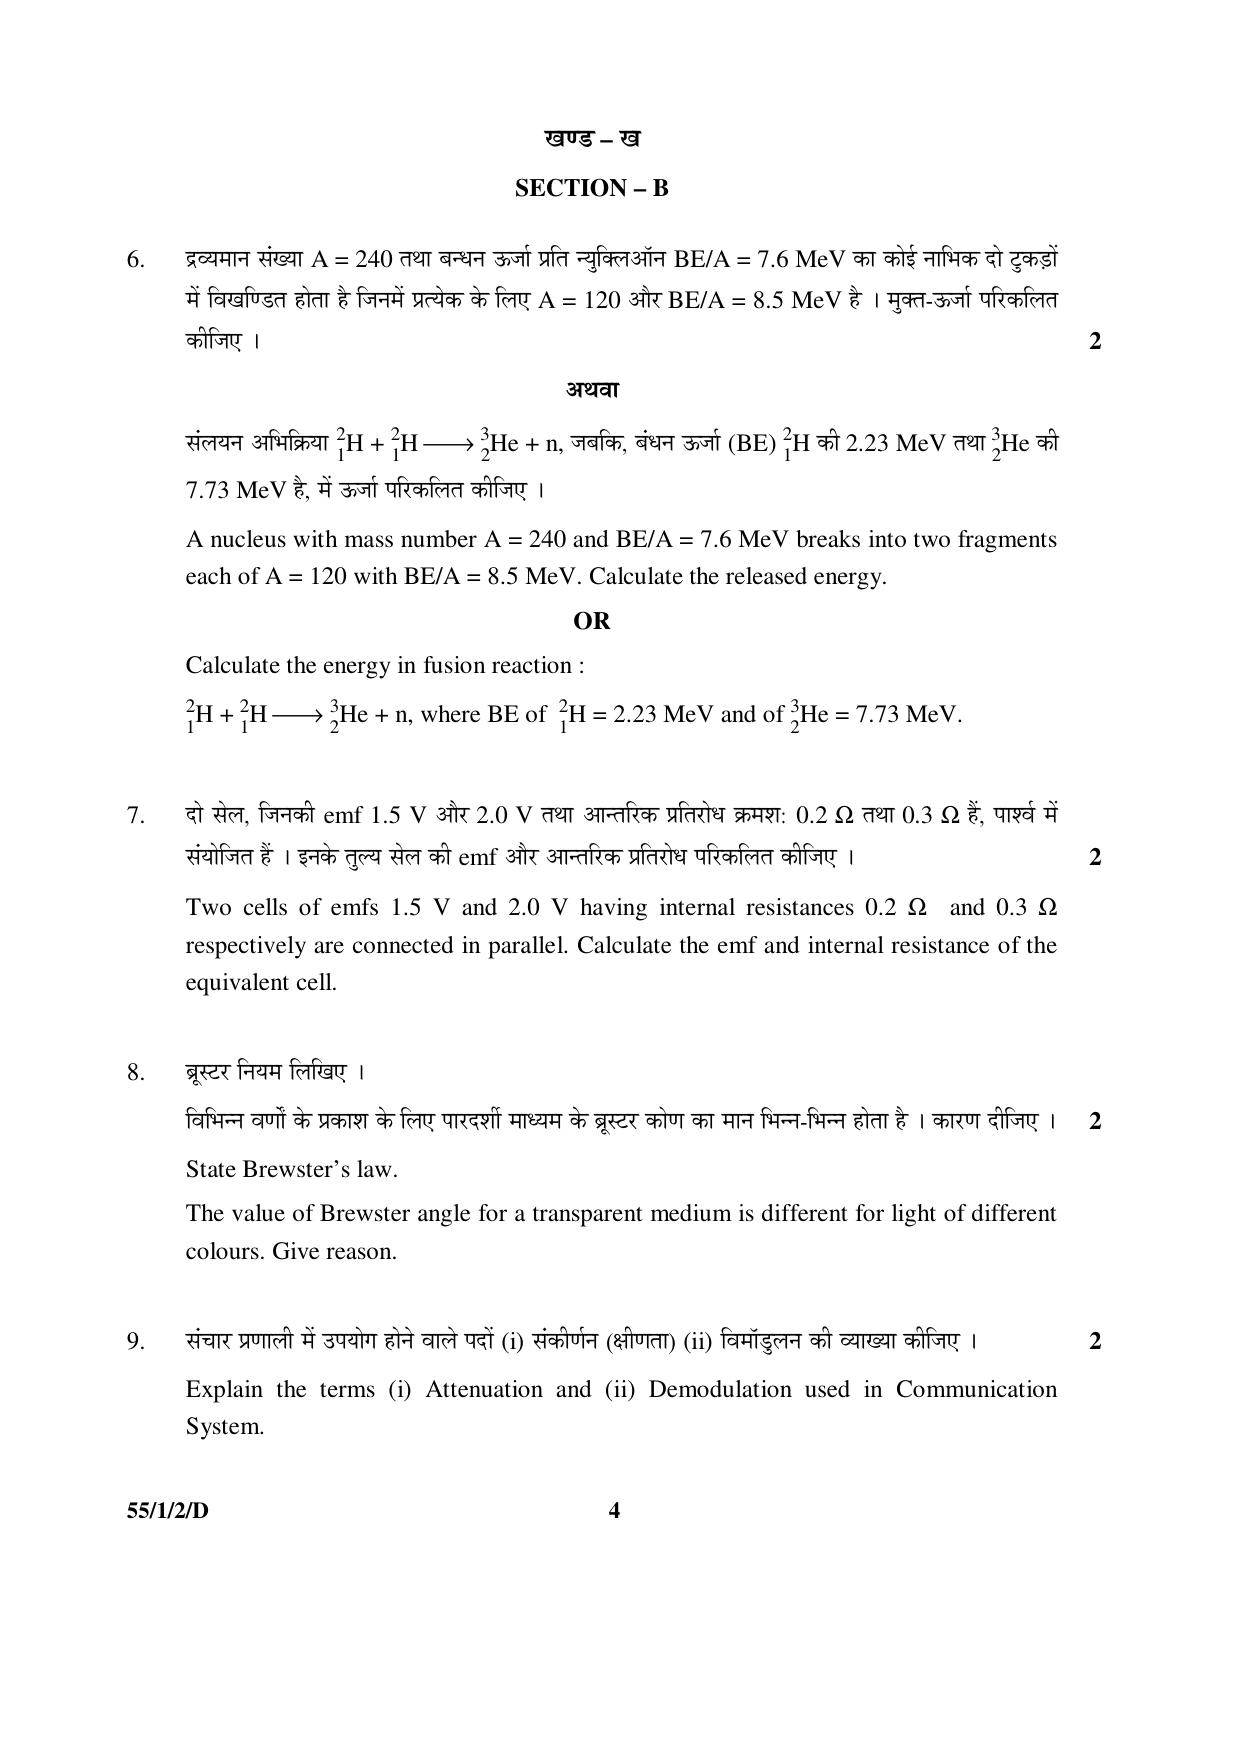 CBSE Class 12 55-1-2-D PHYSICS 2016 Question Paper - Page 4